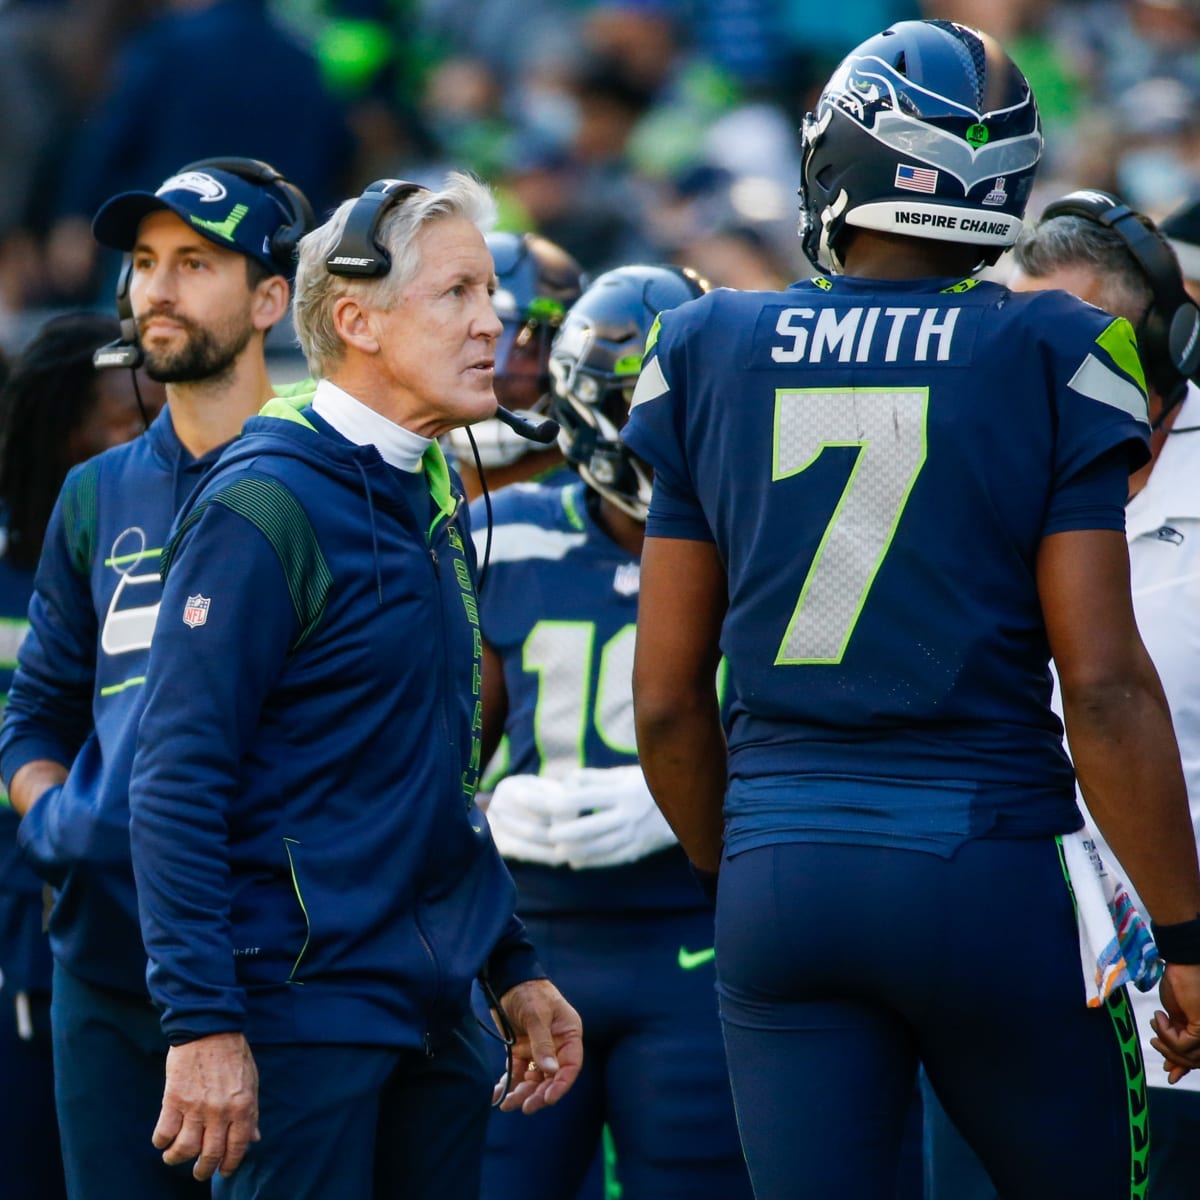 Seattle Seahawks Surprise? Geno Smith, Pete Carroll Ranked High for  QB-Coach Duo - Sports Illustrated Seattle Seahawks News, Analysis and More